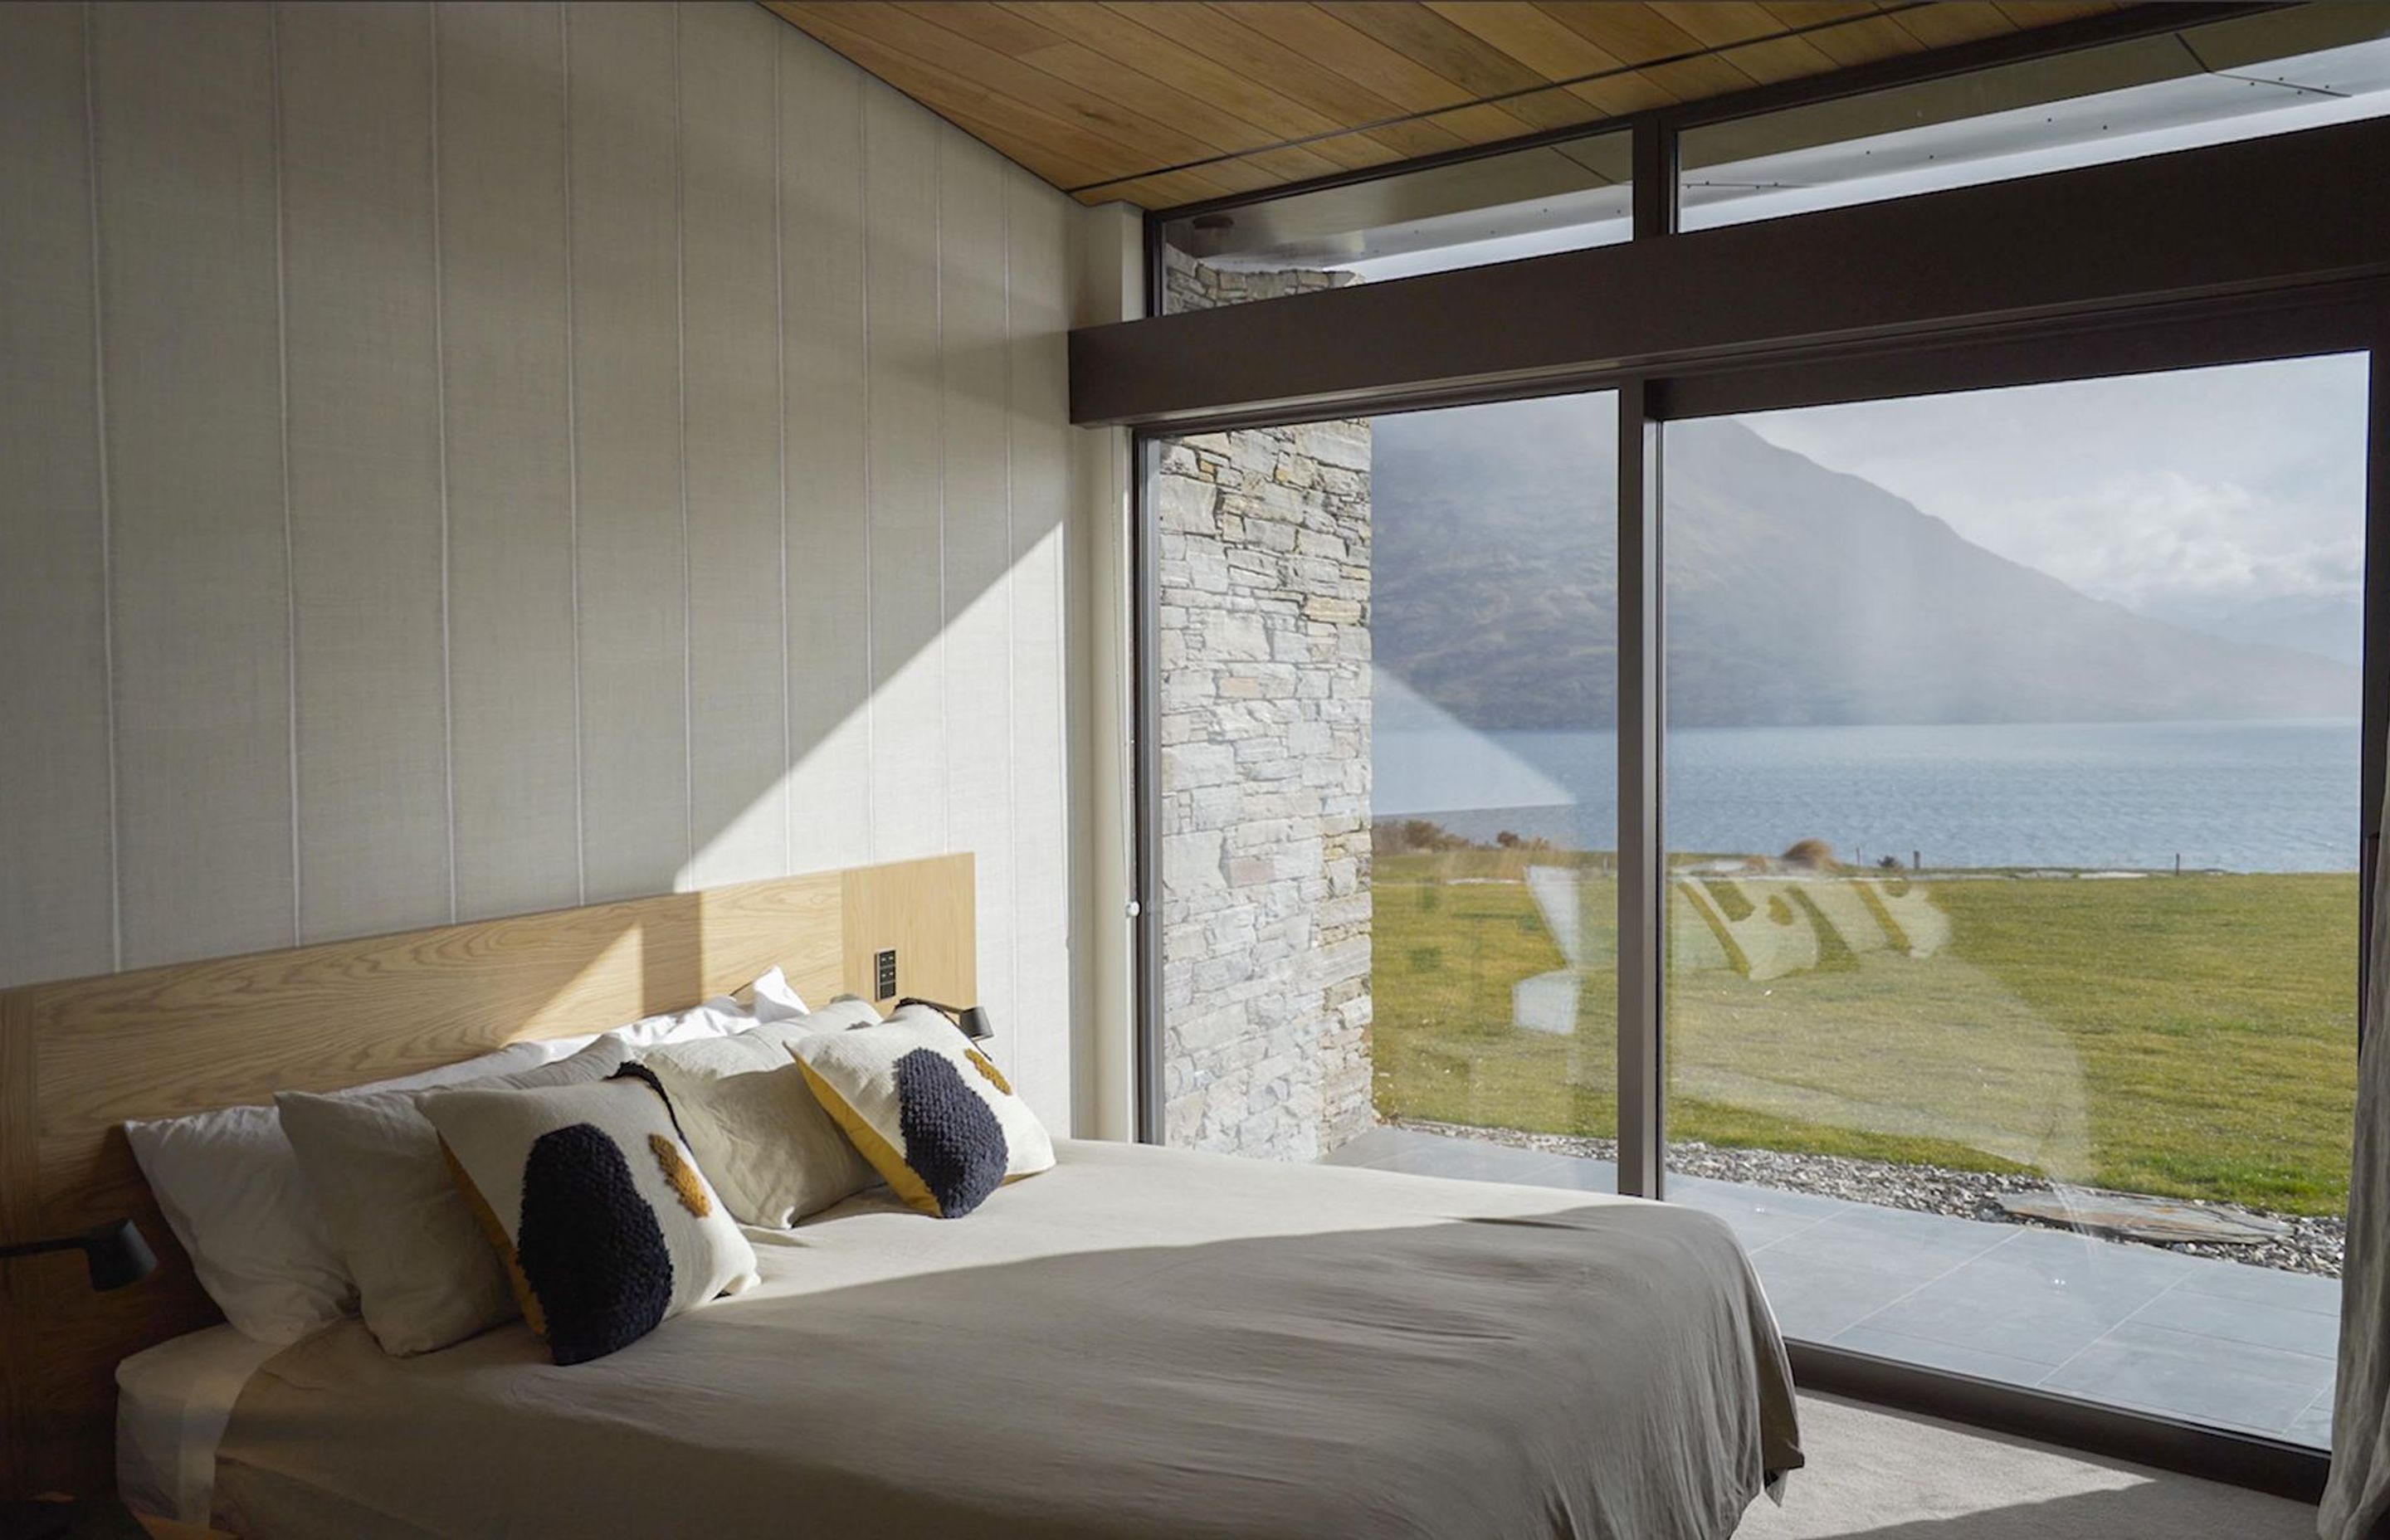 A bedroom on the lower floor has a calm neutral colour palette, making the most of the view of the lake and mountains. Photograph: ArchiPro.